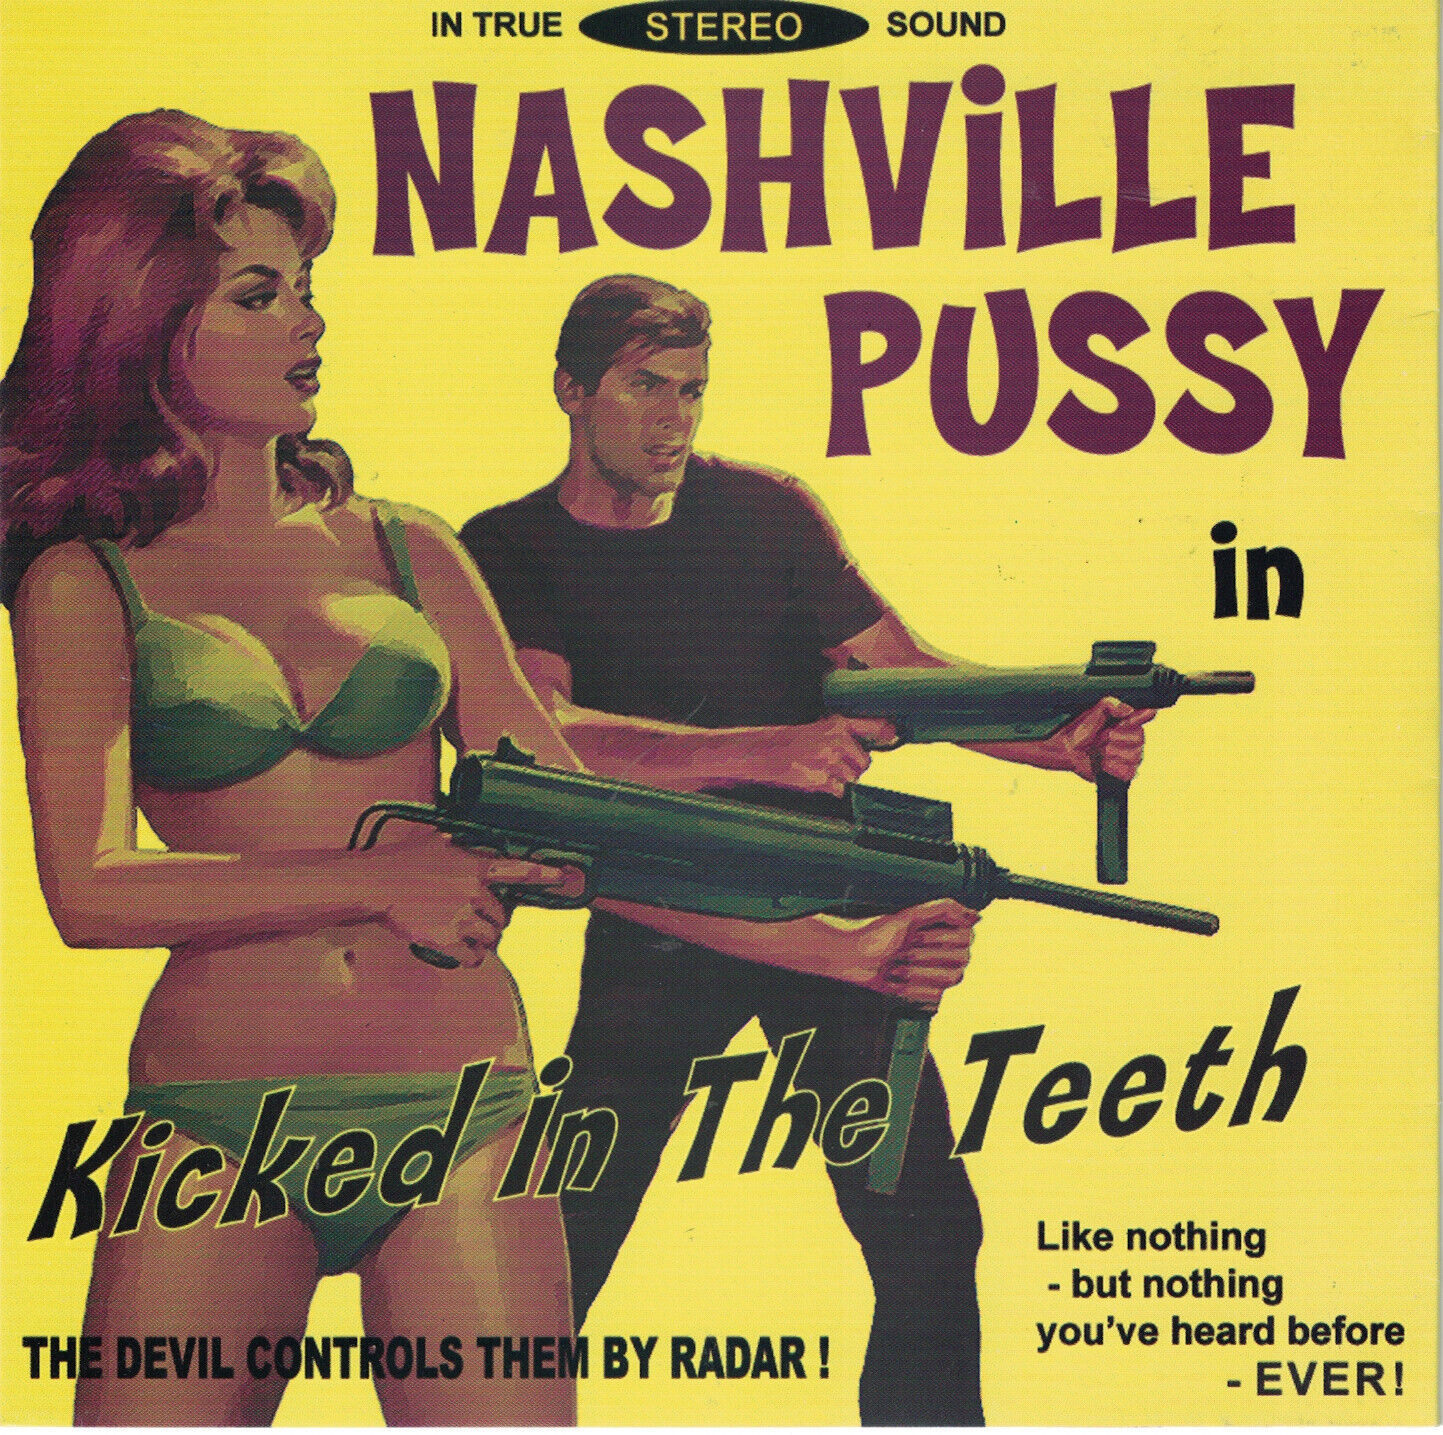 Nashville Pussy "Kicked in the Teeth" 7" Scooch Pooch Records AC/DC Rose Tattoo